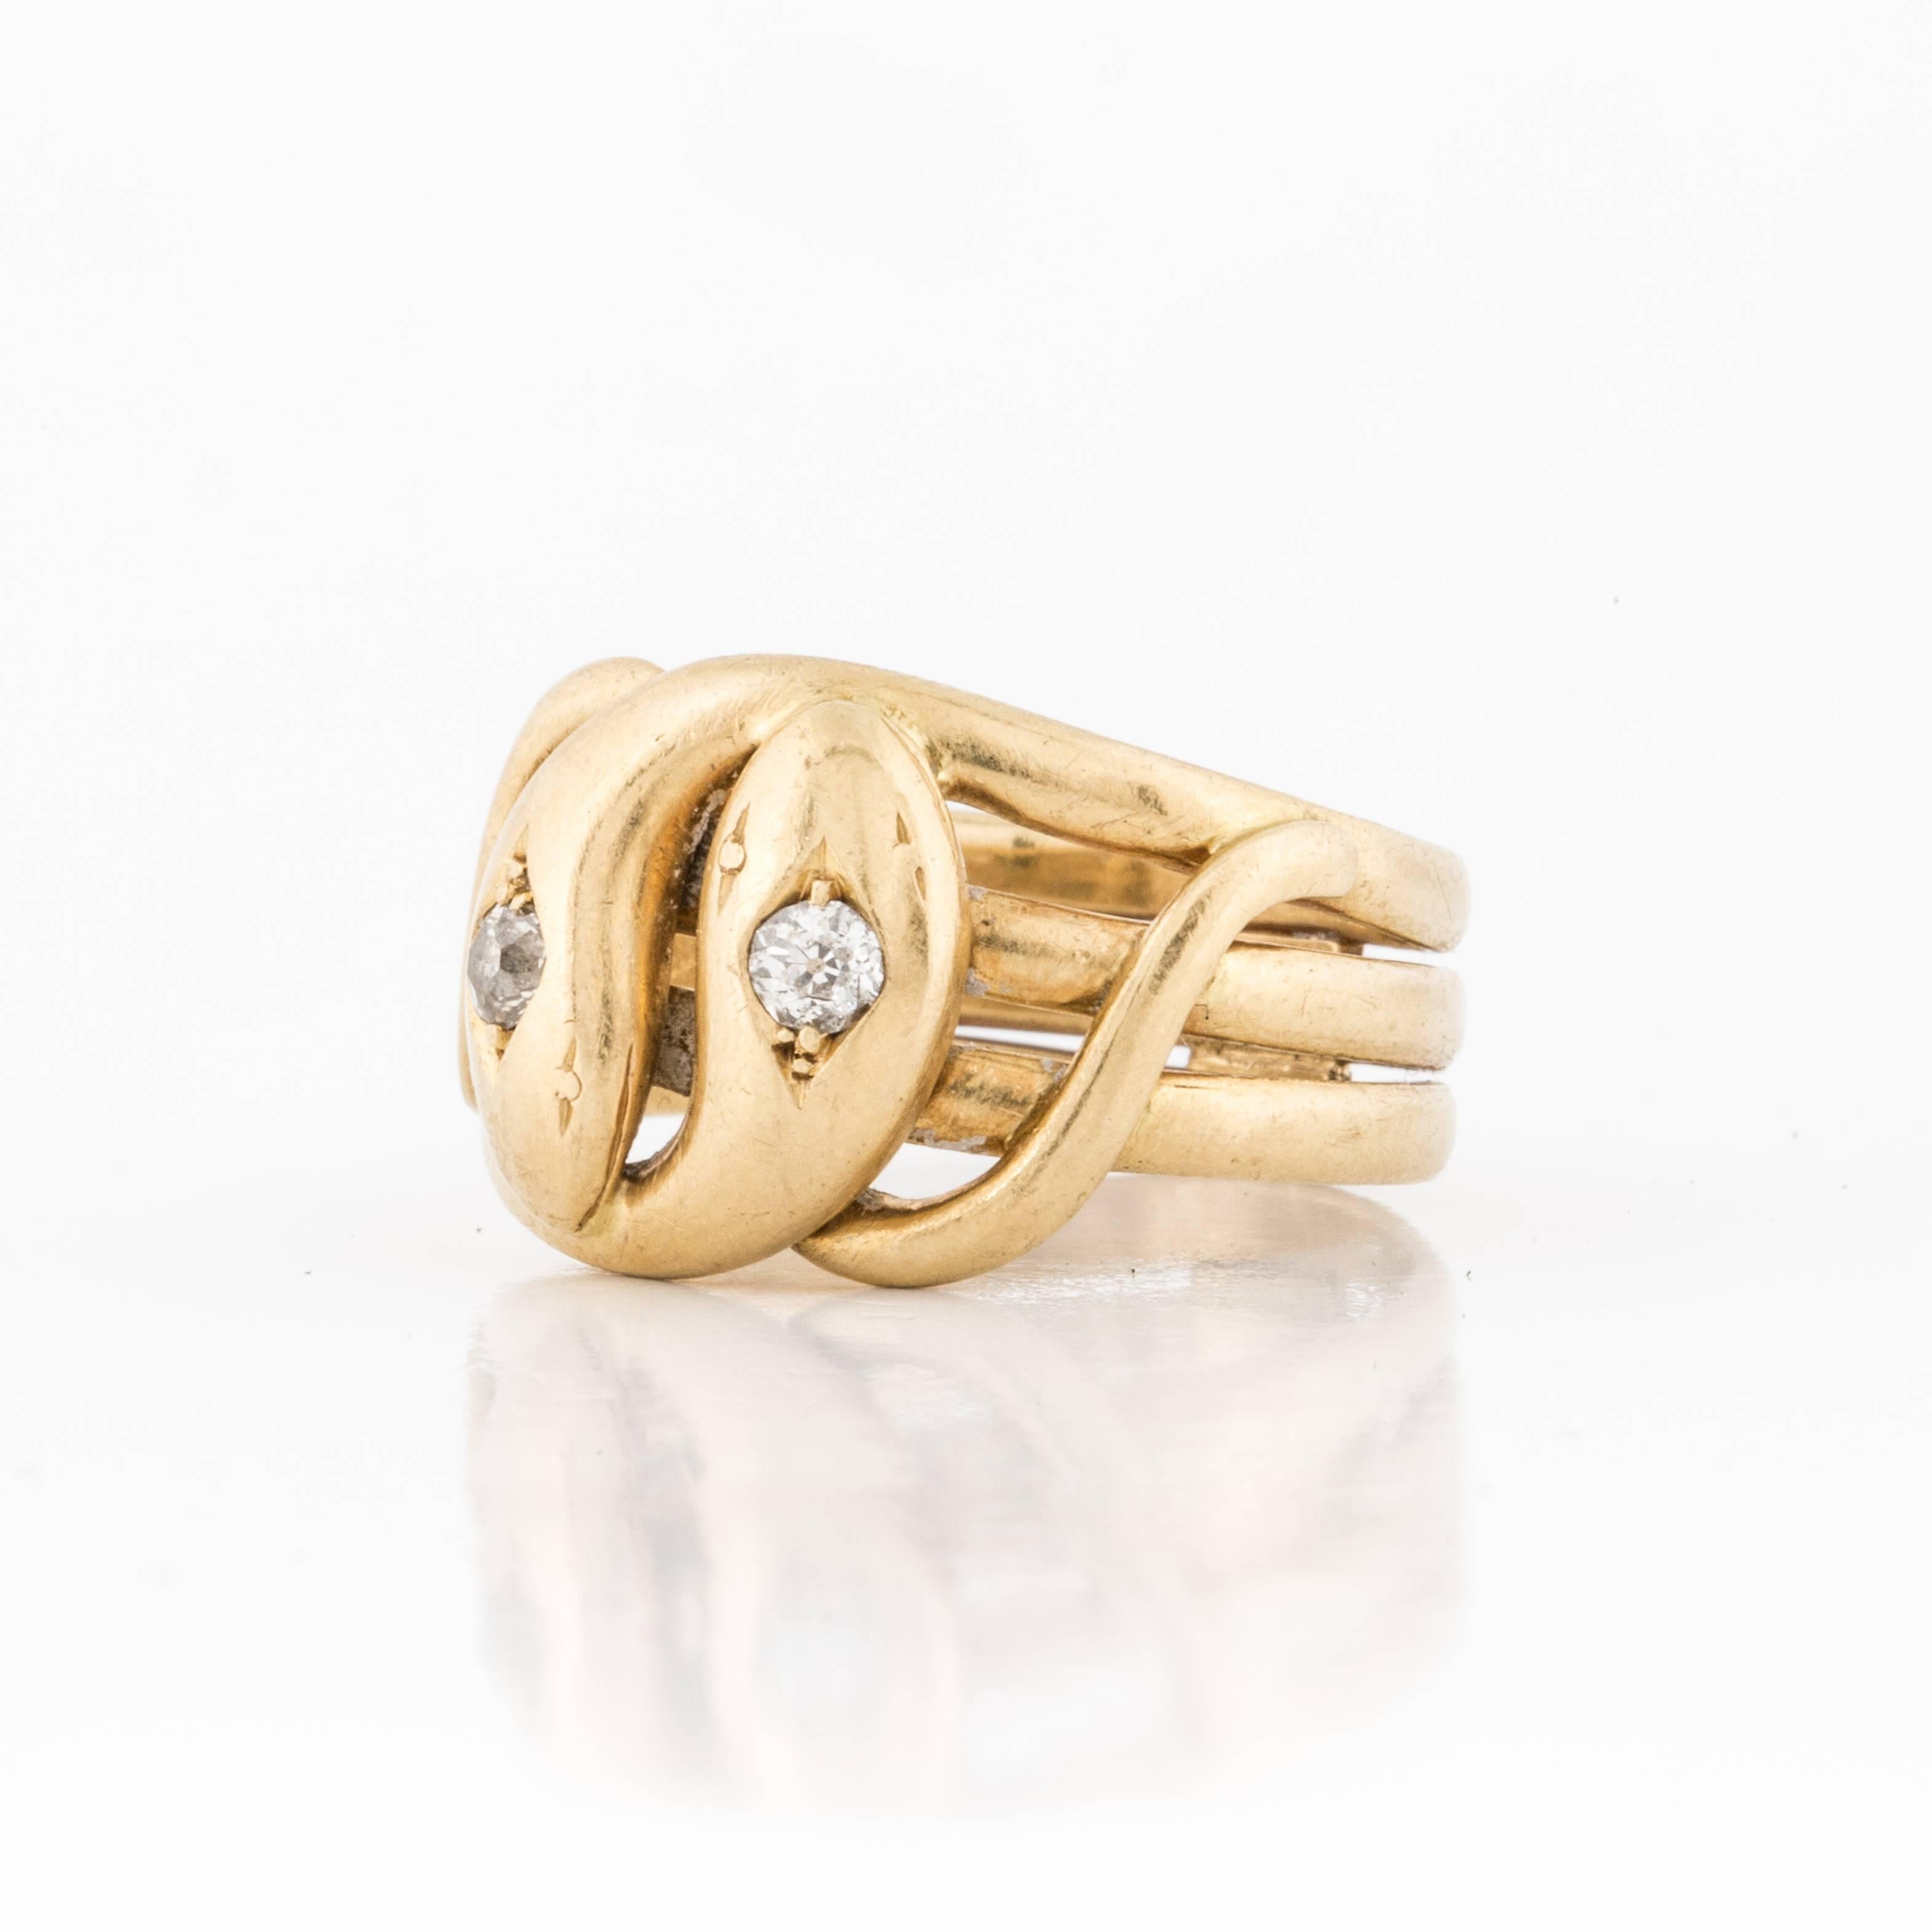 Ring featuring two intertwining serpents in 18K yellow gold.  Each serpents head is set with an old mine-cut diamond that total 0.25 carats, G-J in color and SI clarity.  Ring is currently a size 9 1/2.  Presentation area is 3/4 inches by 1/2 inches.